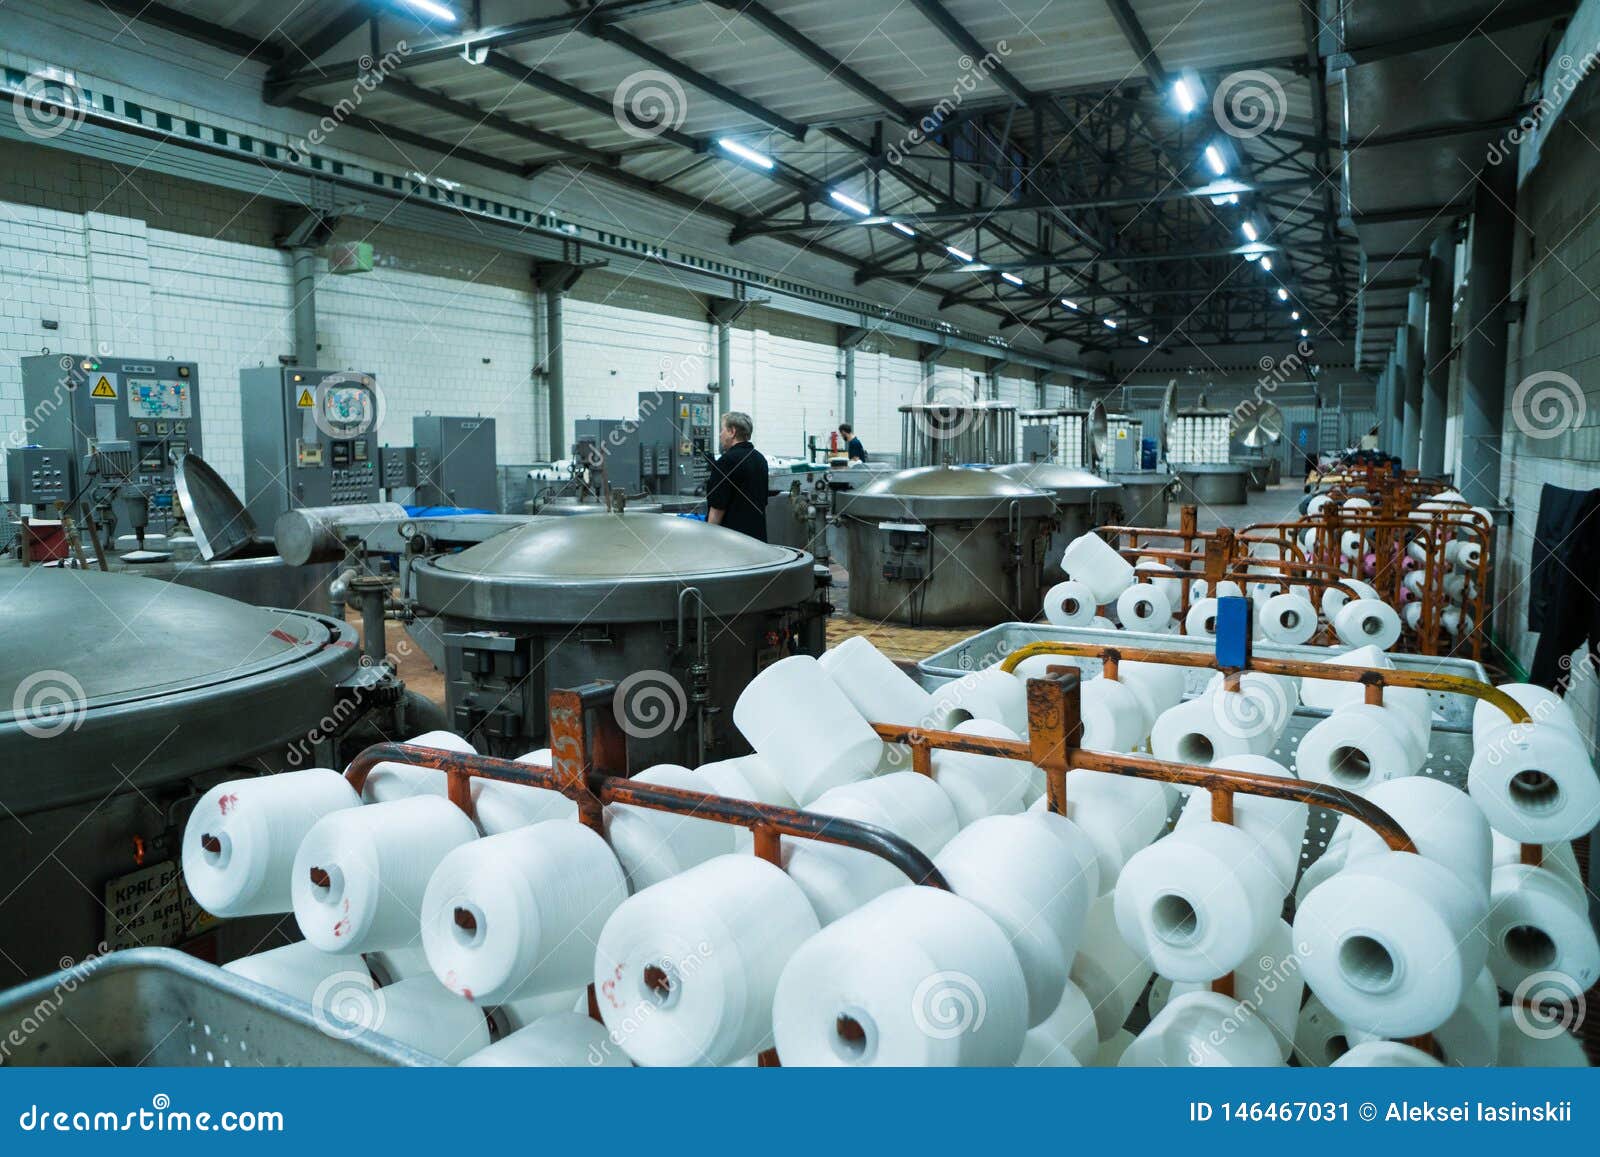 modern technology in dyeing yarns with machines for textile industry, dyeing machine chemical tanks